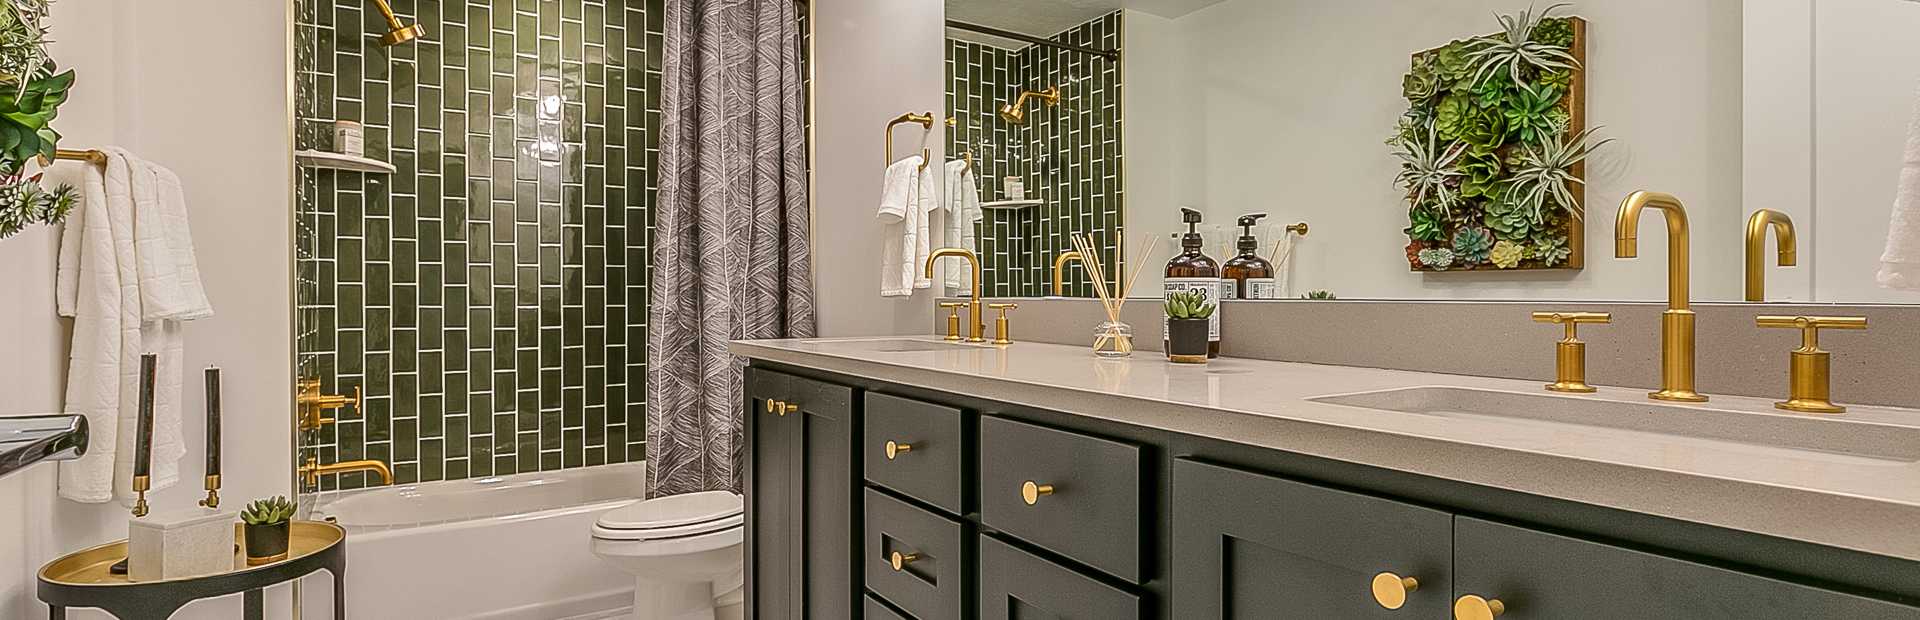 When it comes to remodeling a small bathroom, every inch of space counts. However, just because your bathroom is small doesn’t mean it can’t be stylish and functional.